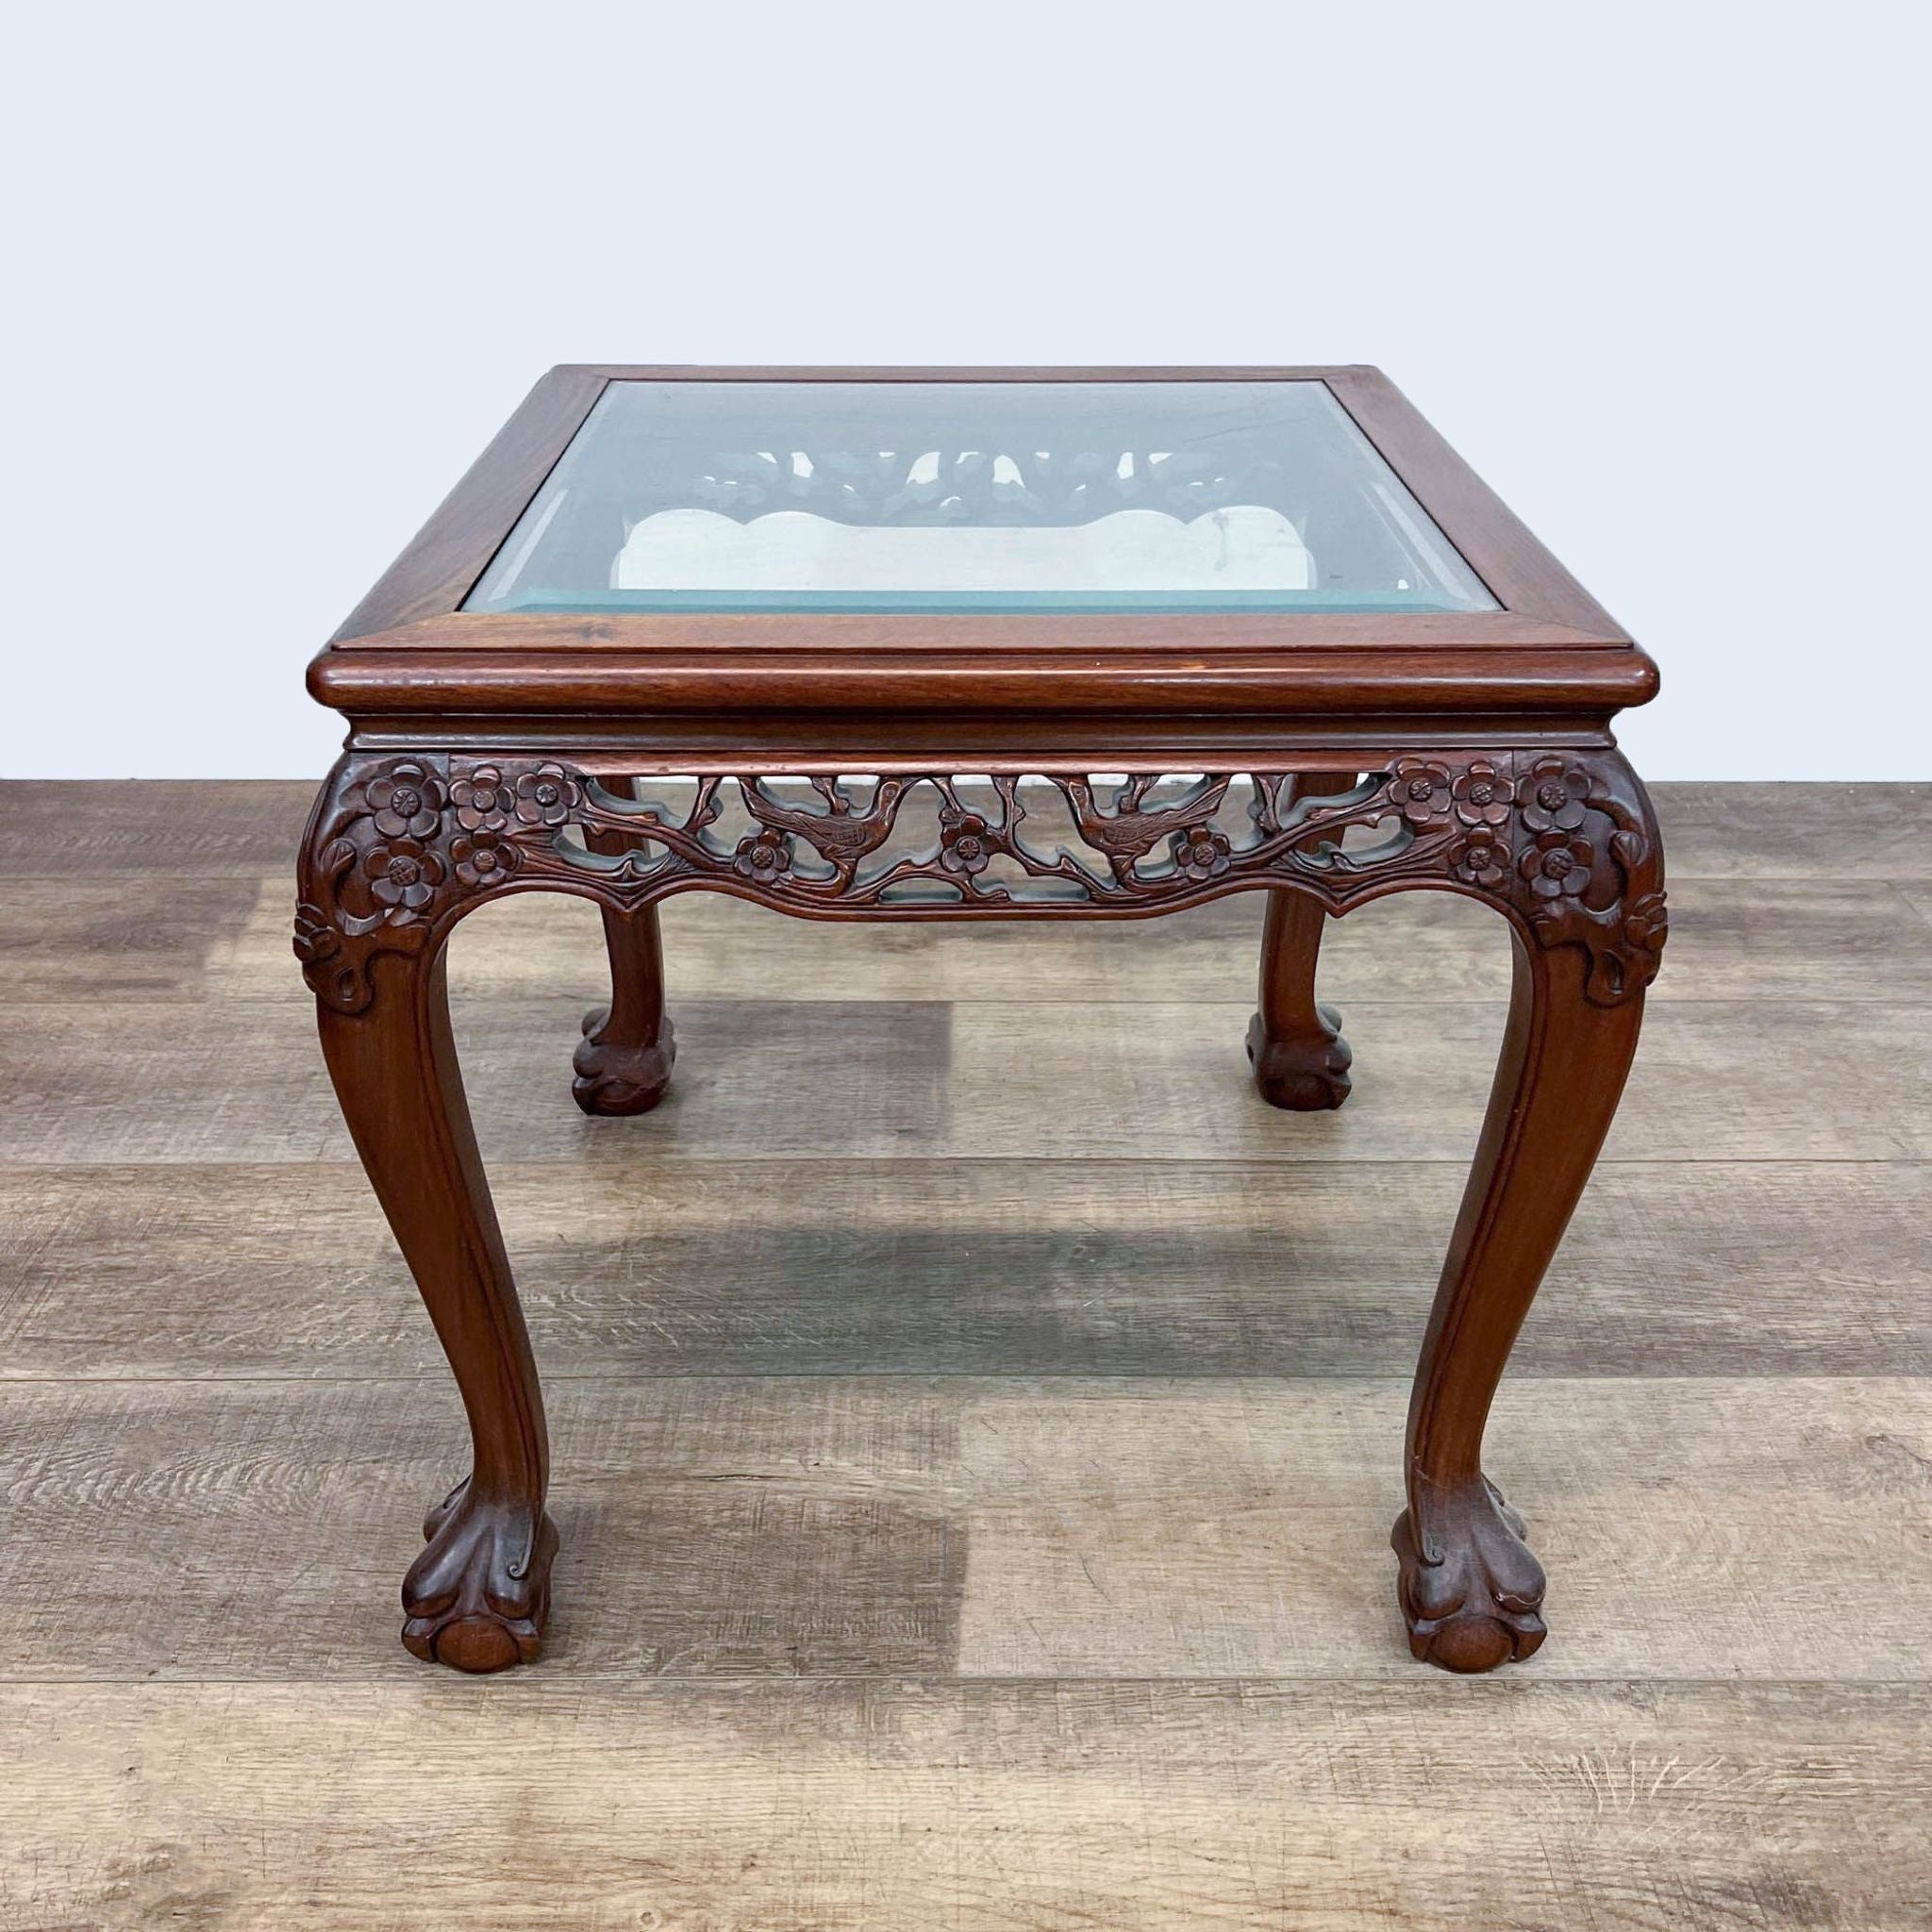 Reperch Chinese Chippendale end table with intricate carving and glass top, showing ball and claw feet on wooden floor.